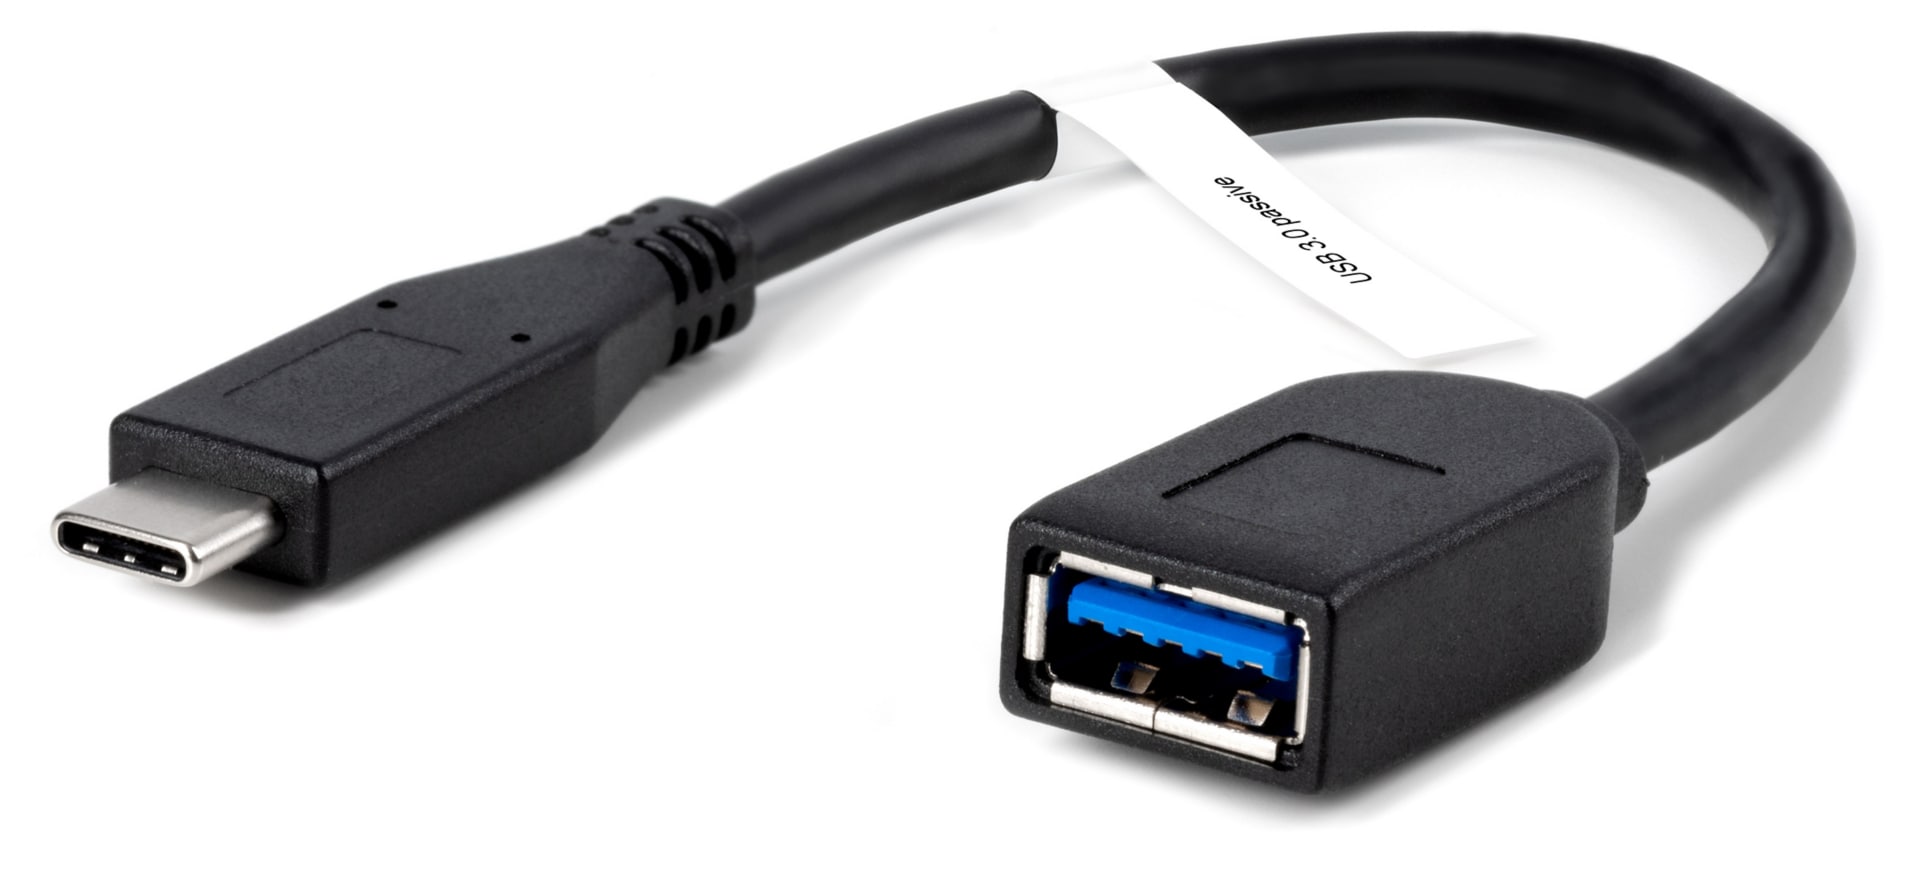 Plugable USB C to USB Adapter Cable,Connects USB Type C Laptop,Tablet,or Phone to USB 3.0 Device,Driverless